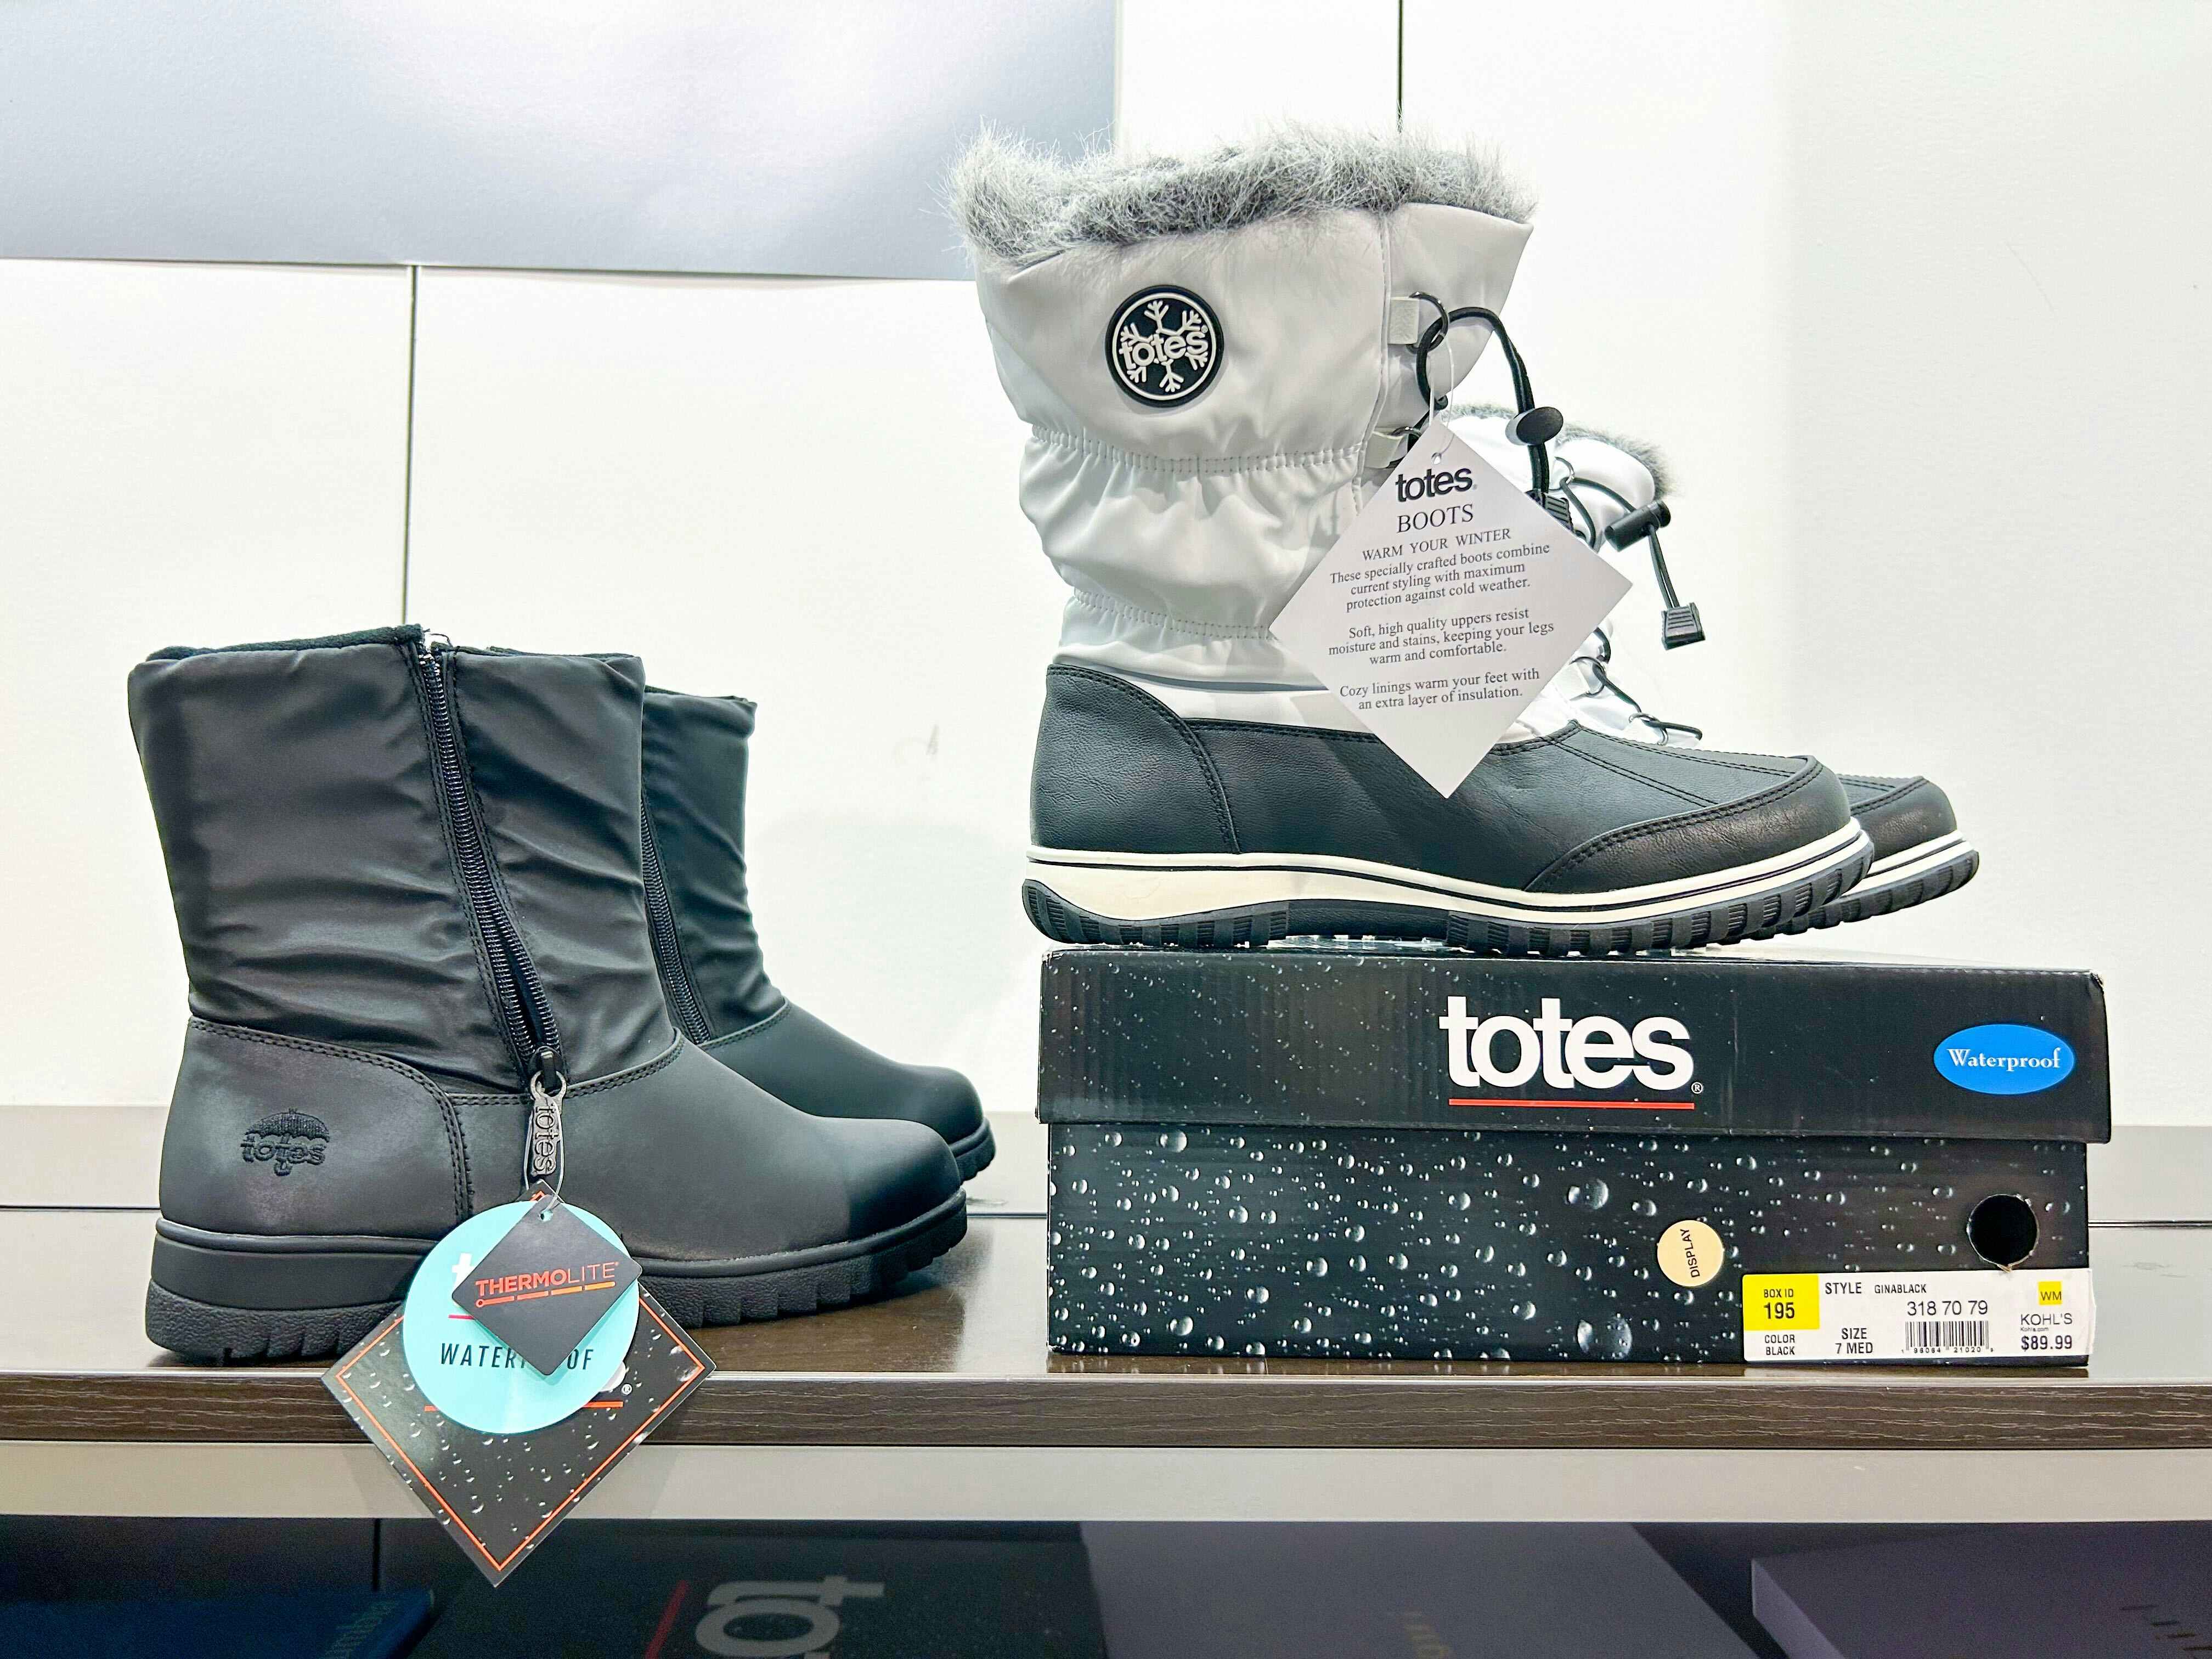 Totes Kids' Snow Boots: All Styles, Only $13.99 at JCPenney (Reg. $70)